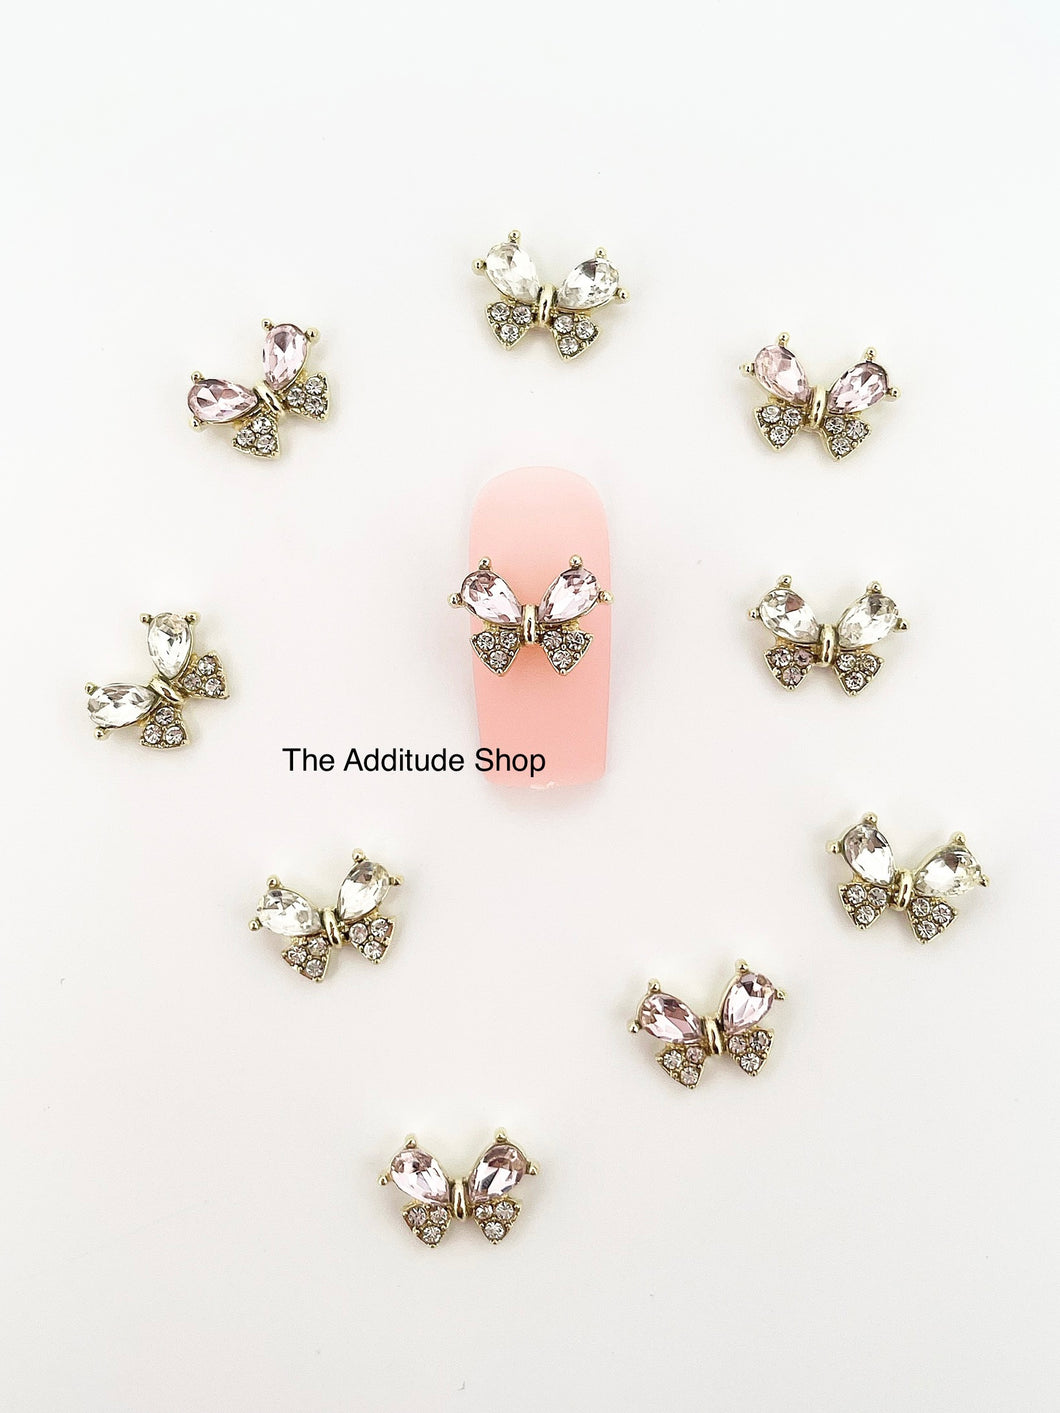 Alloy Nail 3D Charms #9 - 10 Pieces